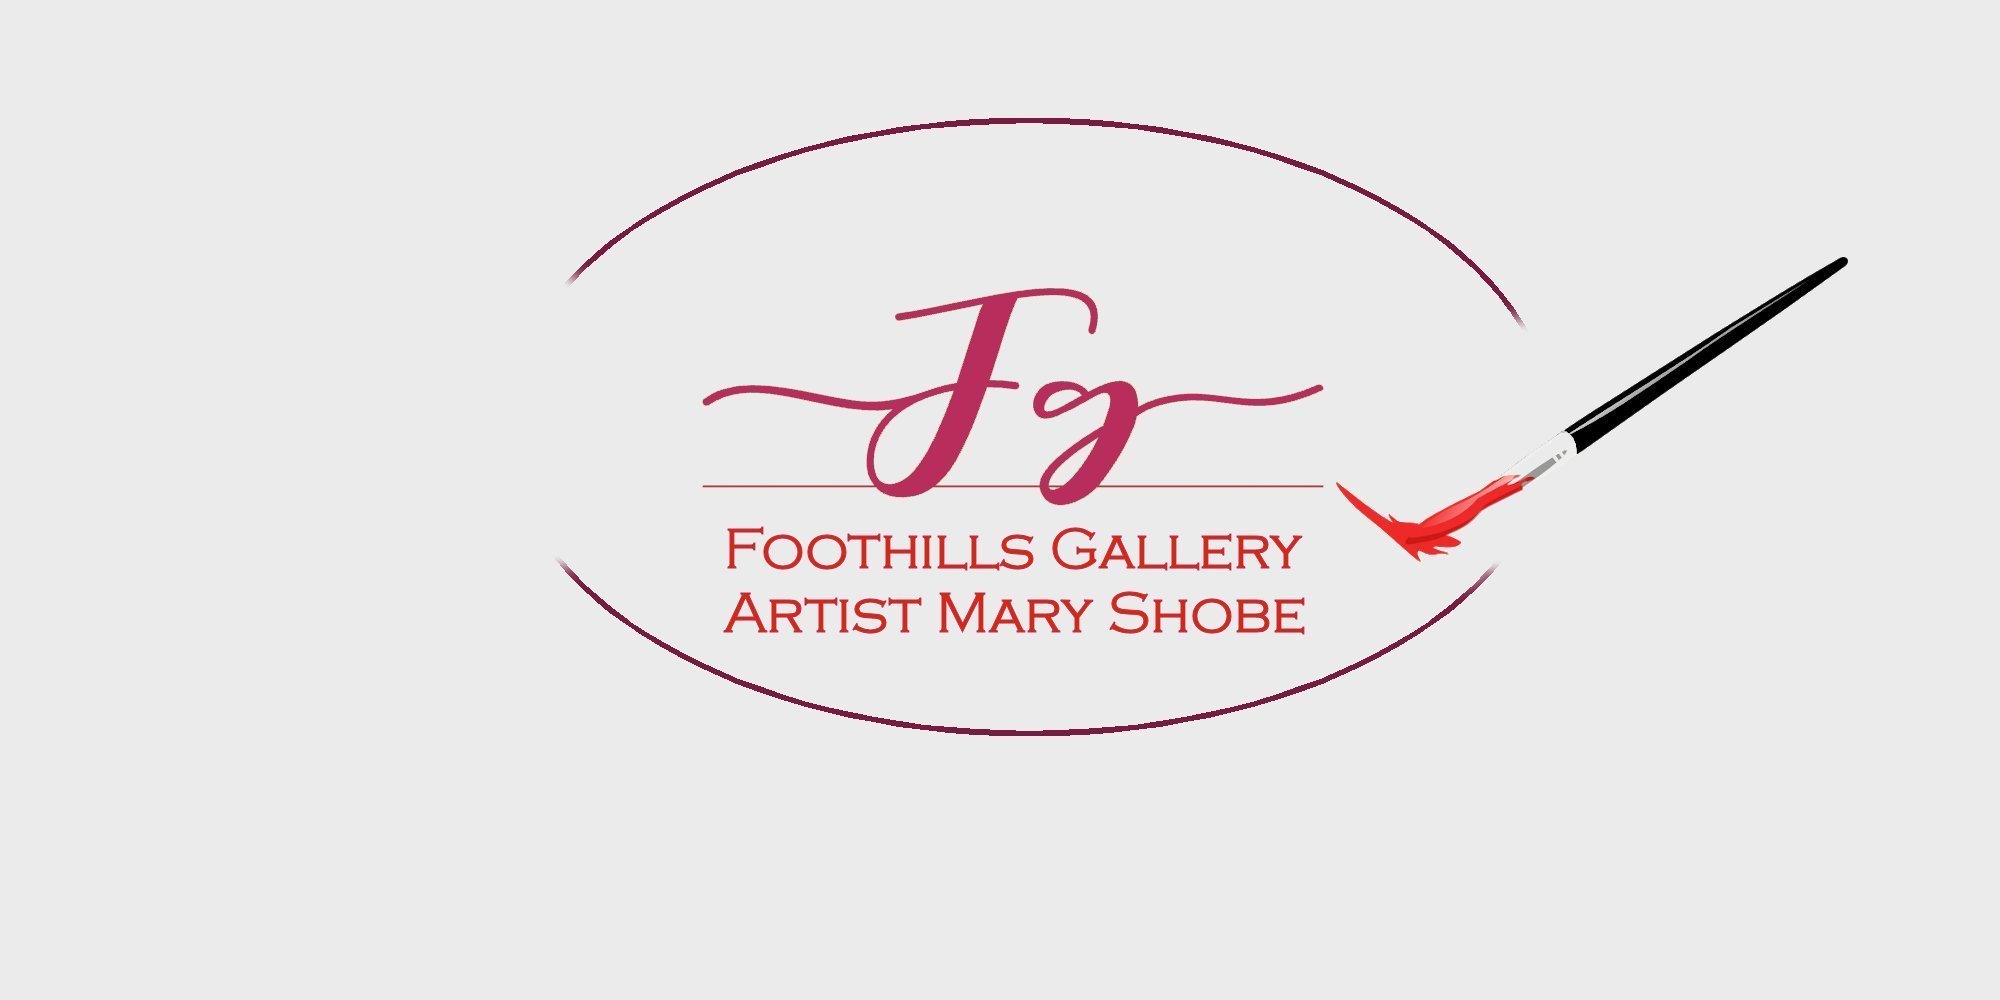 Foothills Gallery